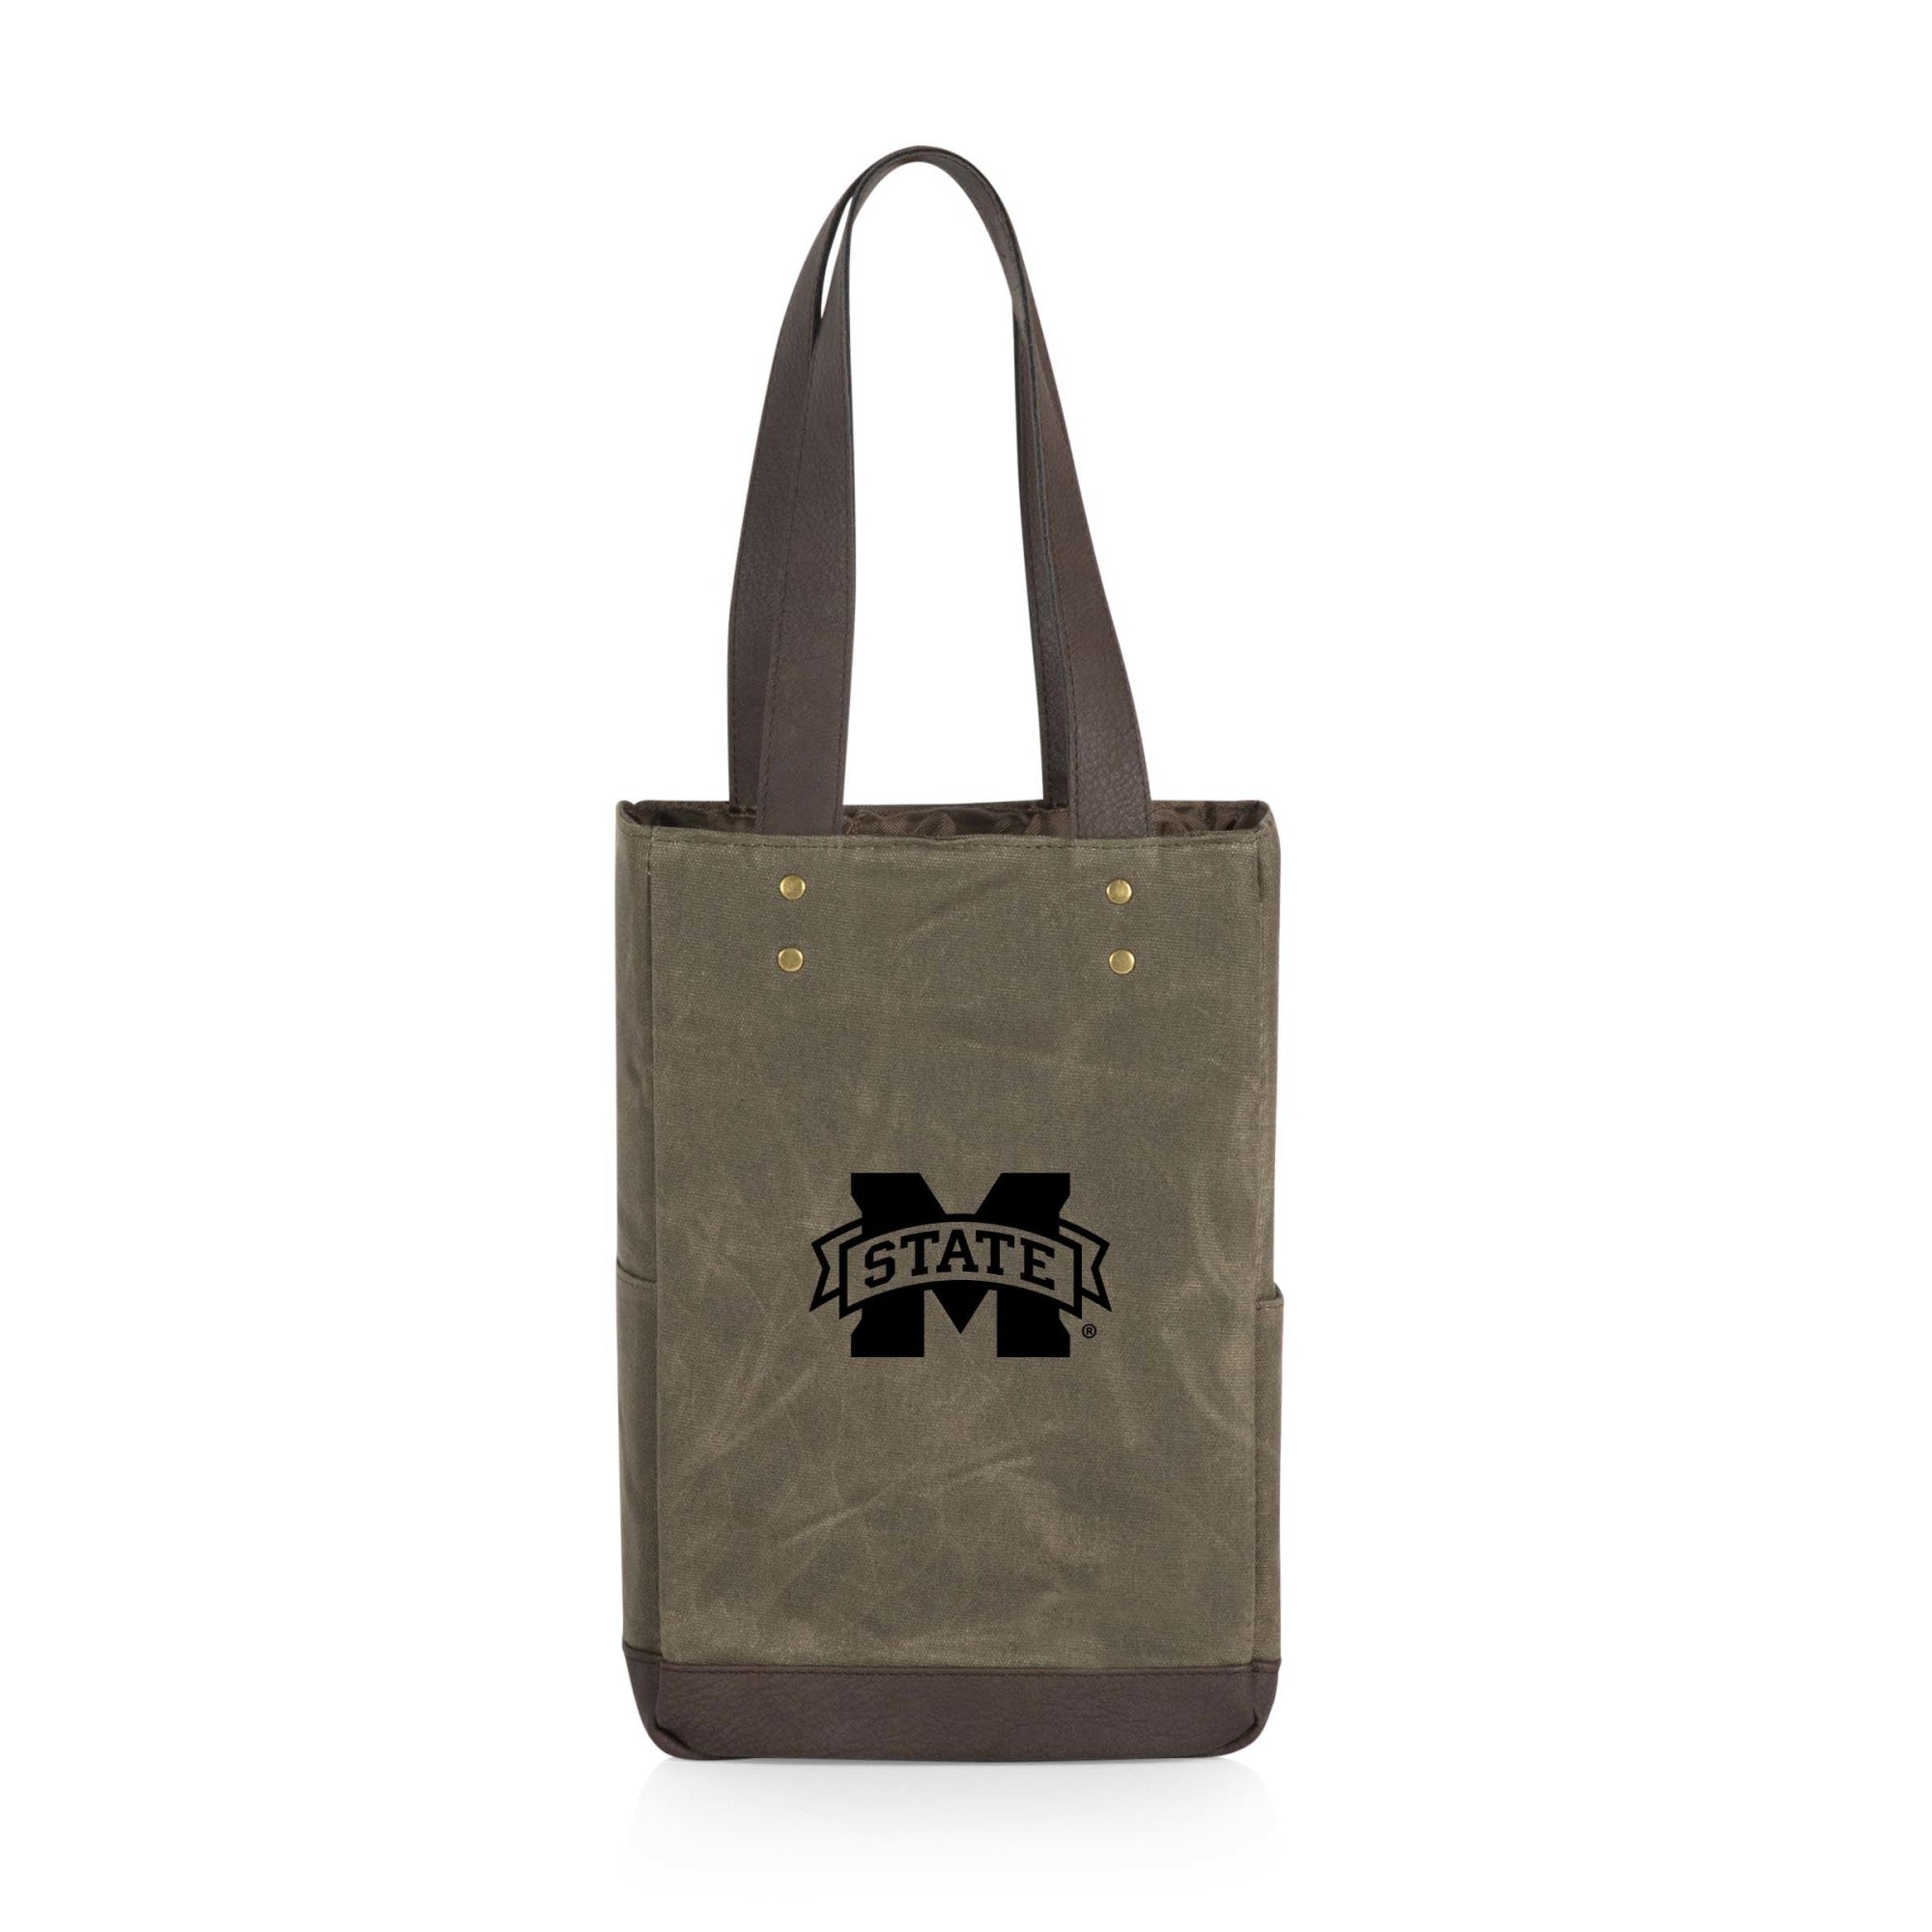 Mississippi State Bulldogs - 2 Bottle Insulated Wine Cooler Bag